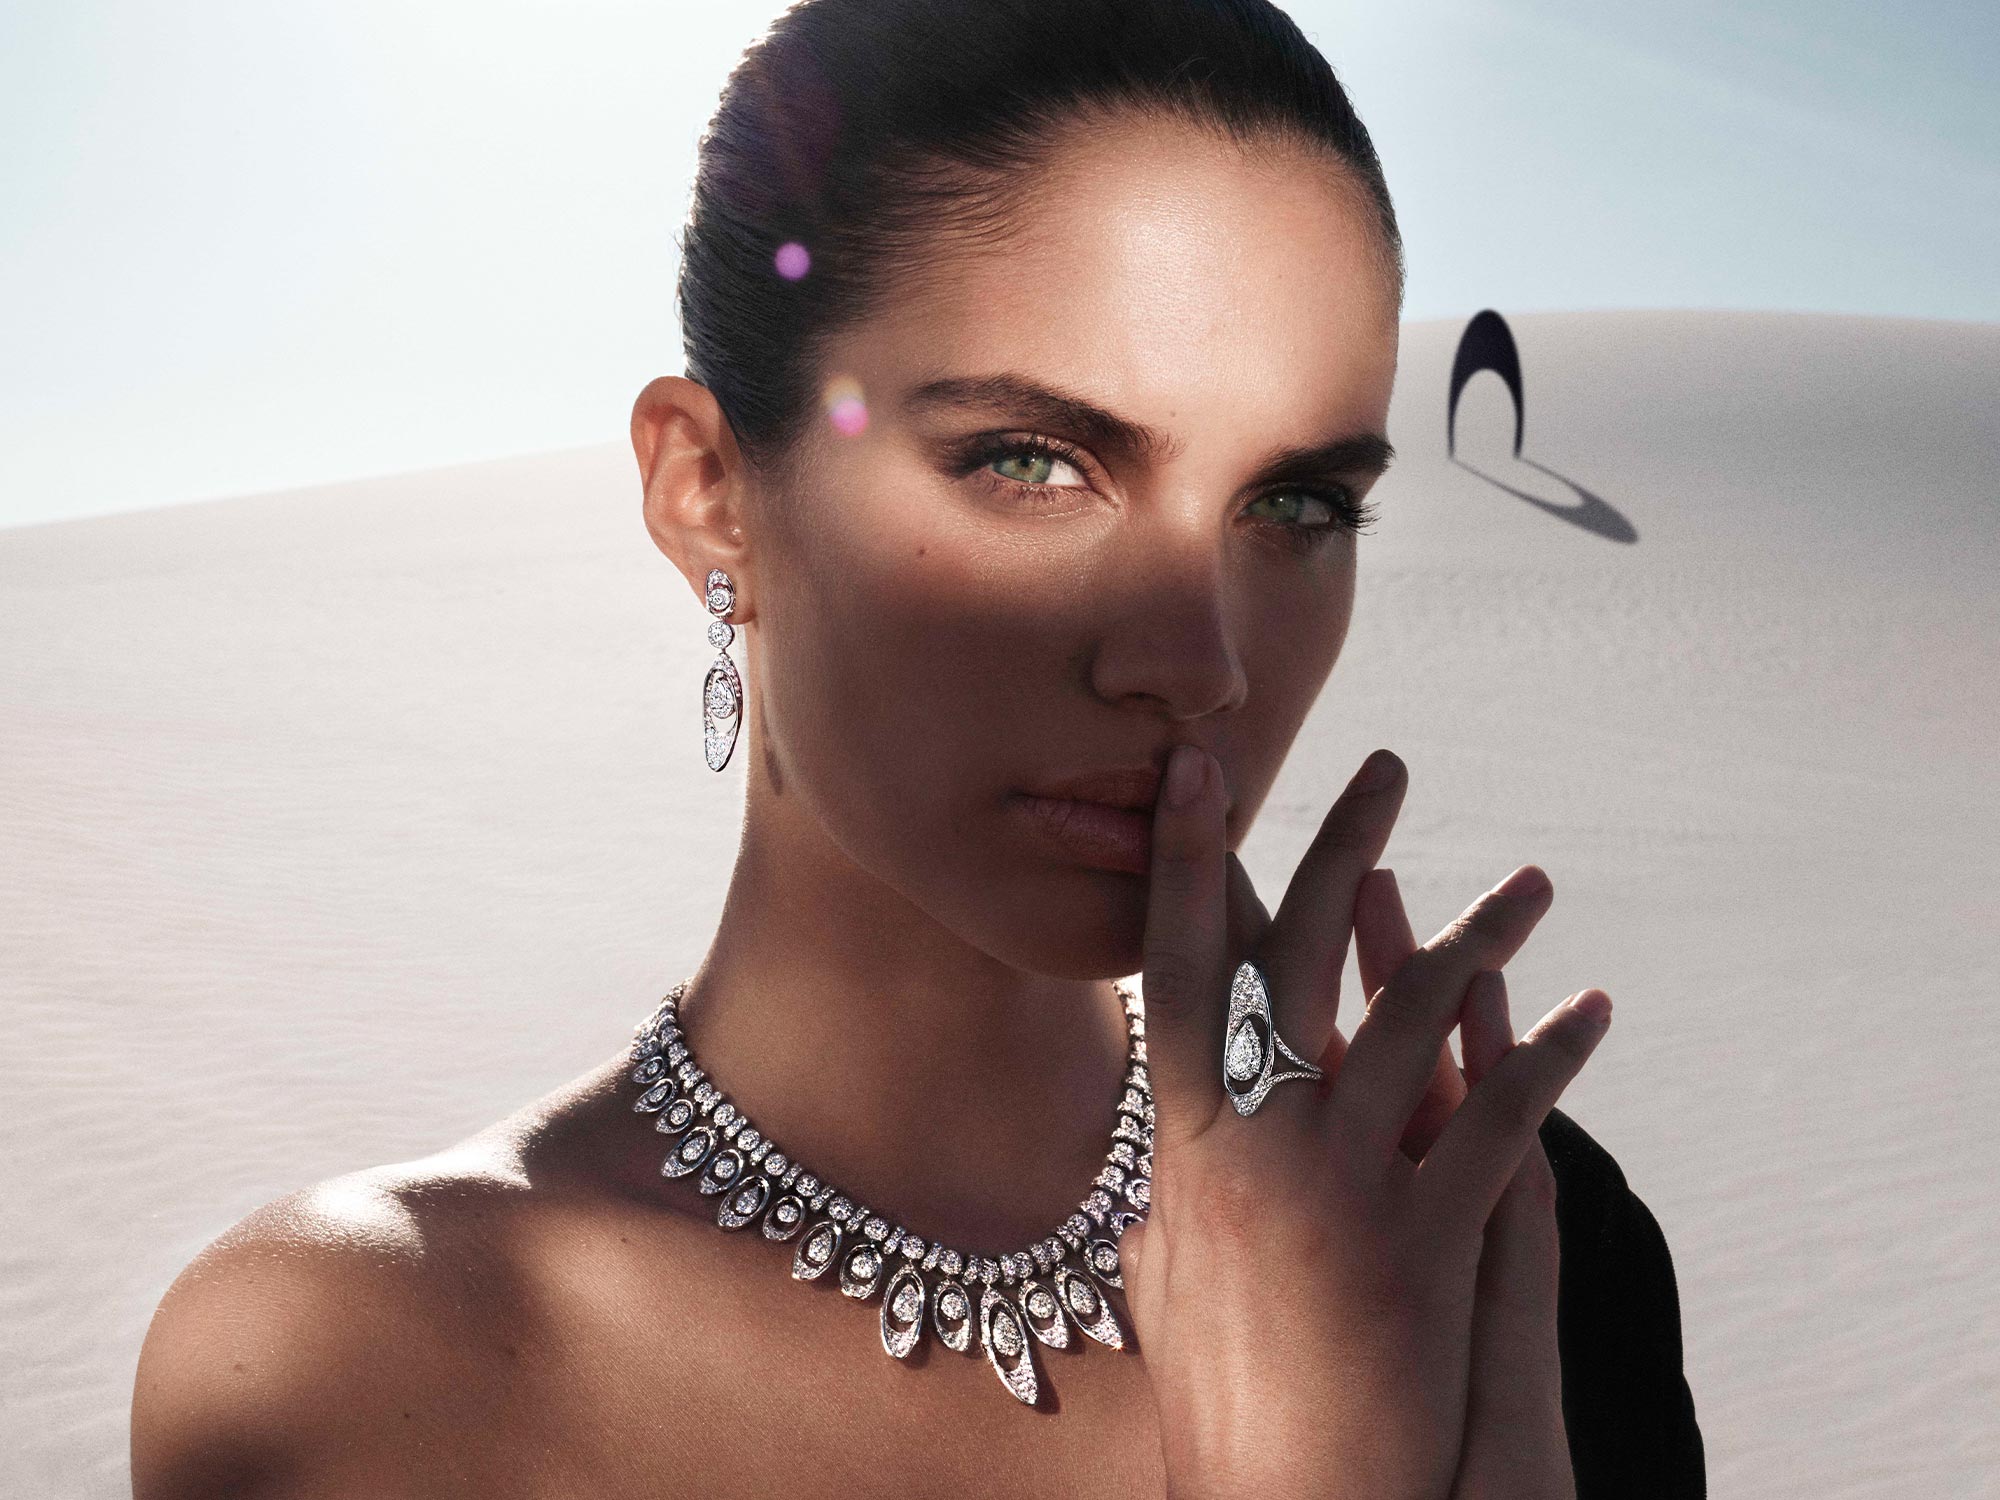 Close up of a model wearing Graff Gateway diamond earrings, necklace and ring from the Tribal jewellery collection, in a desert